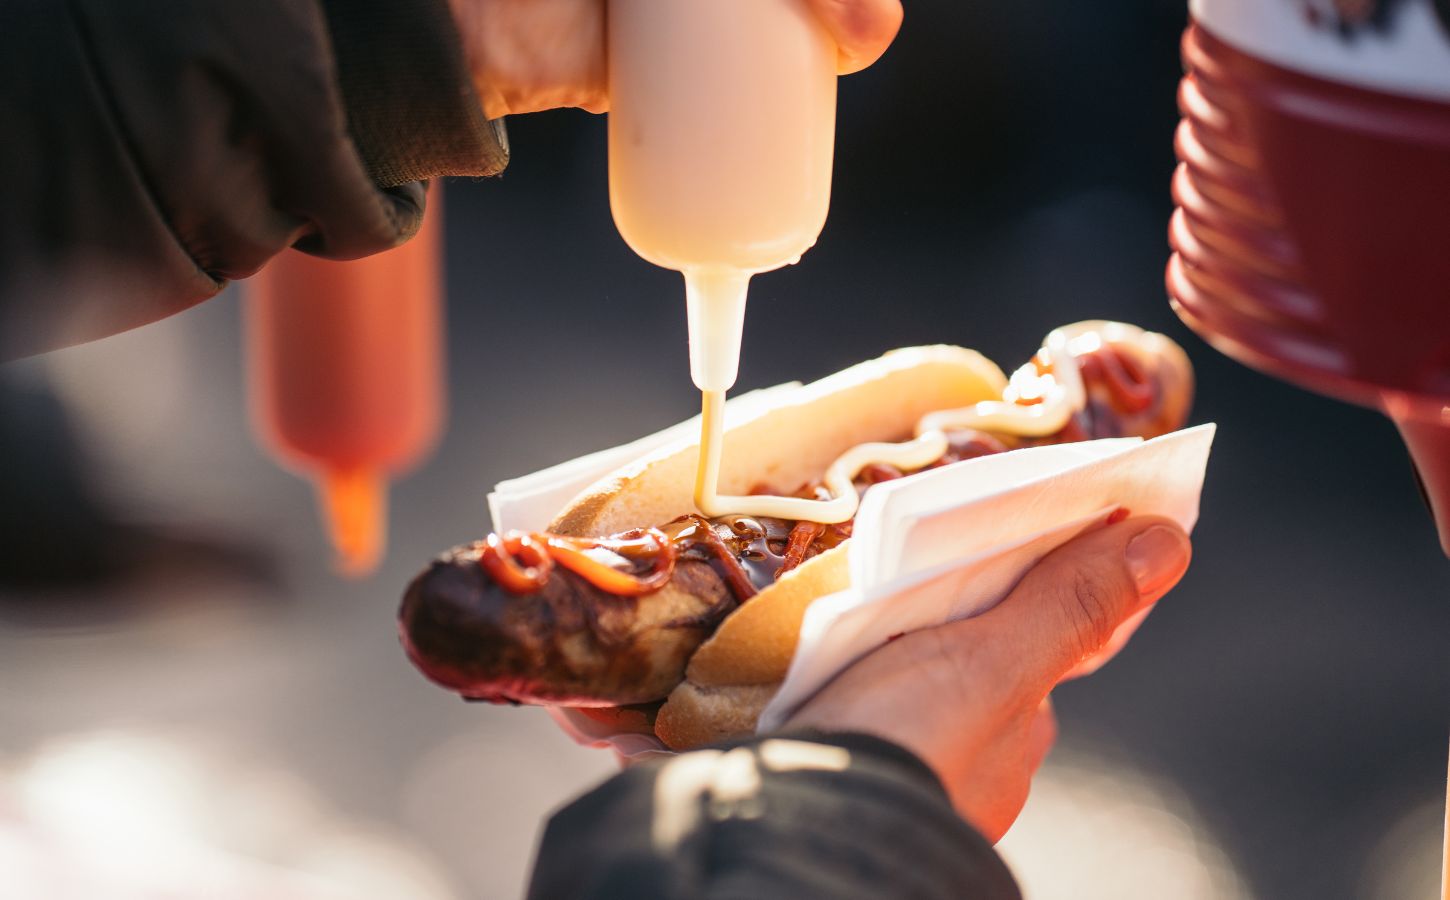 A person's hand squeezing sauce onto a meat hot dog, which can raise stroke risk